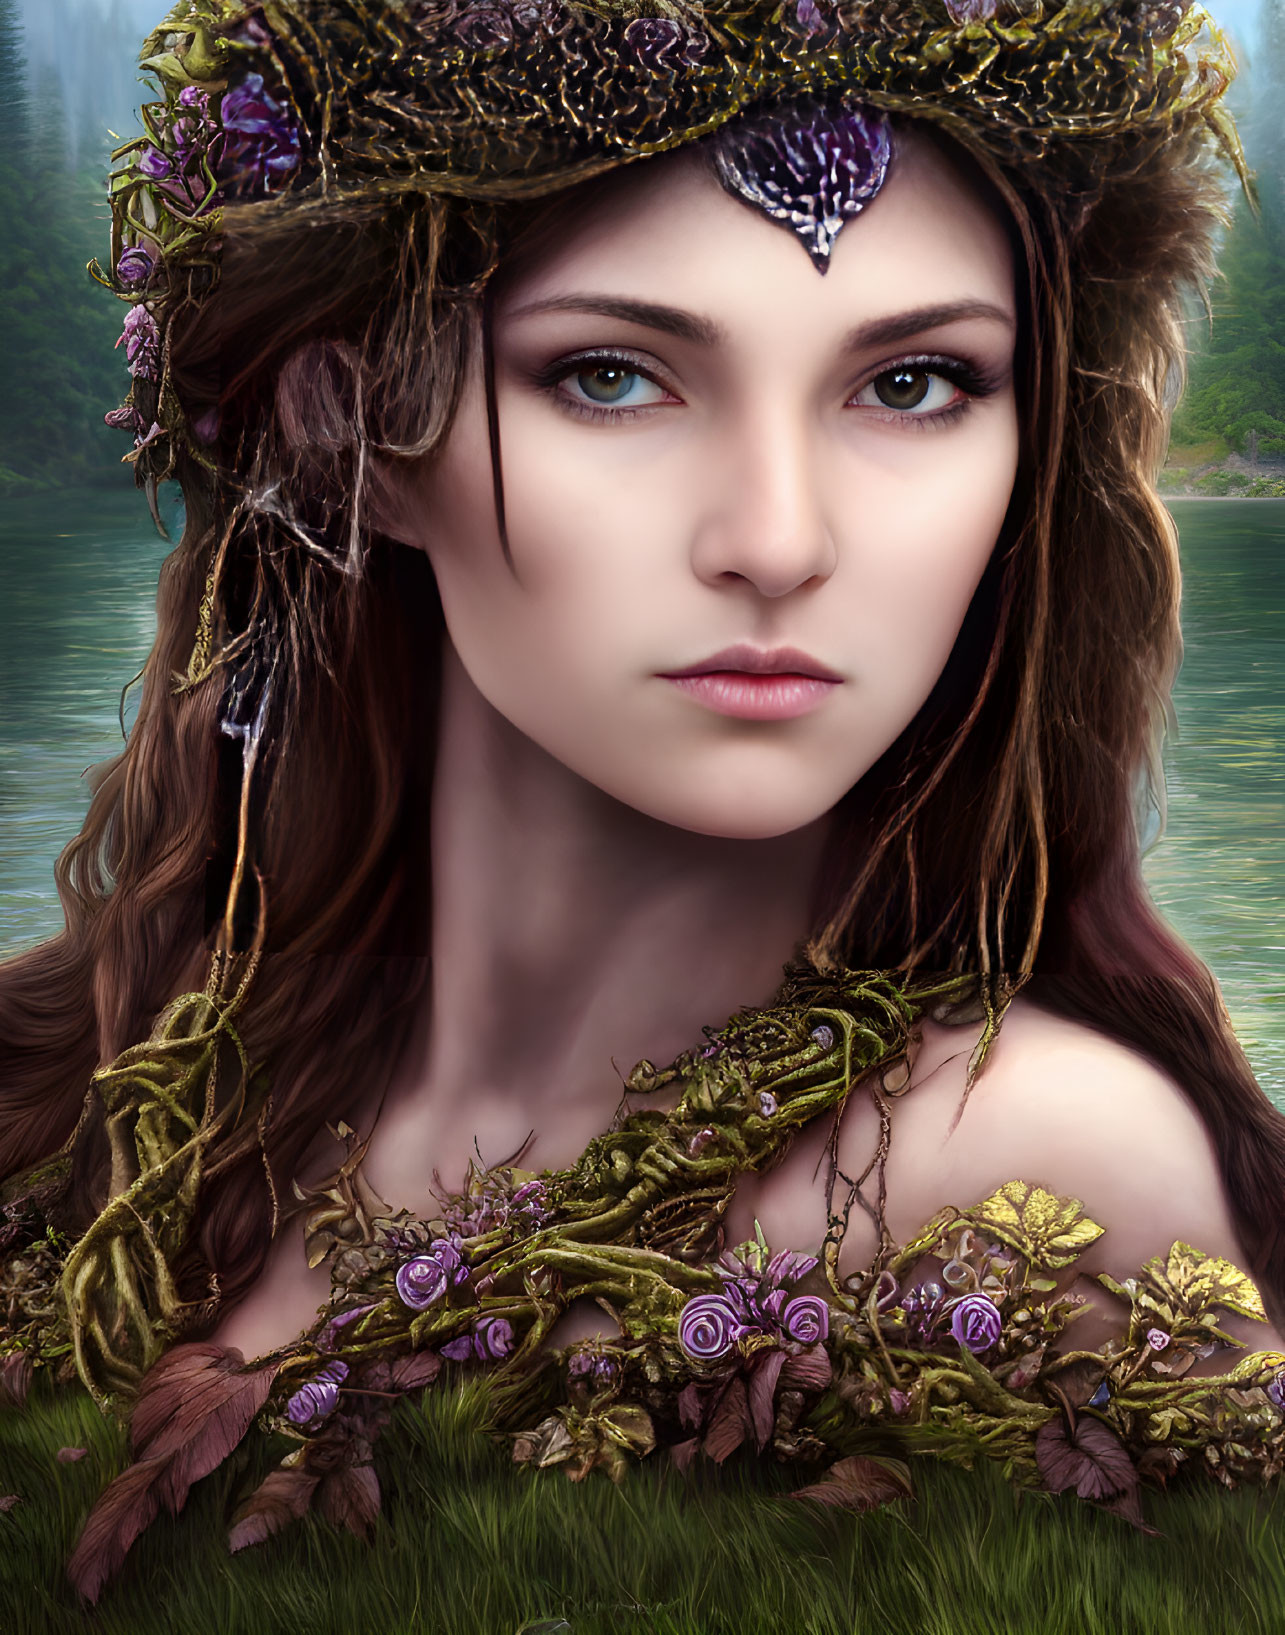 Woman with Floral Crown and Nature Jewelry by Forest Lake